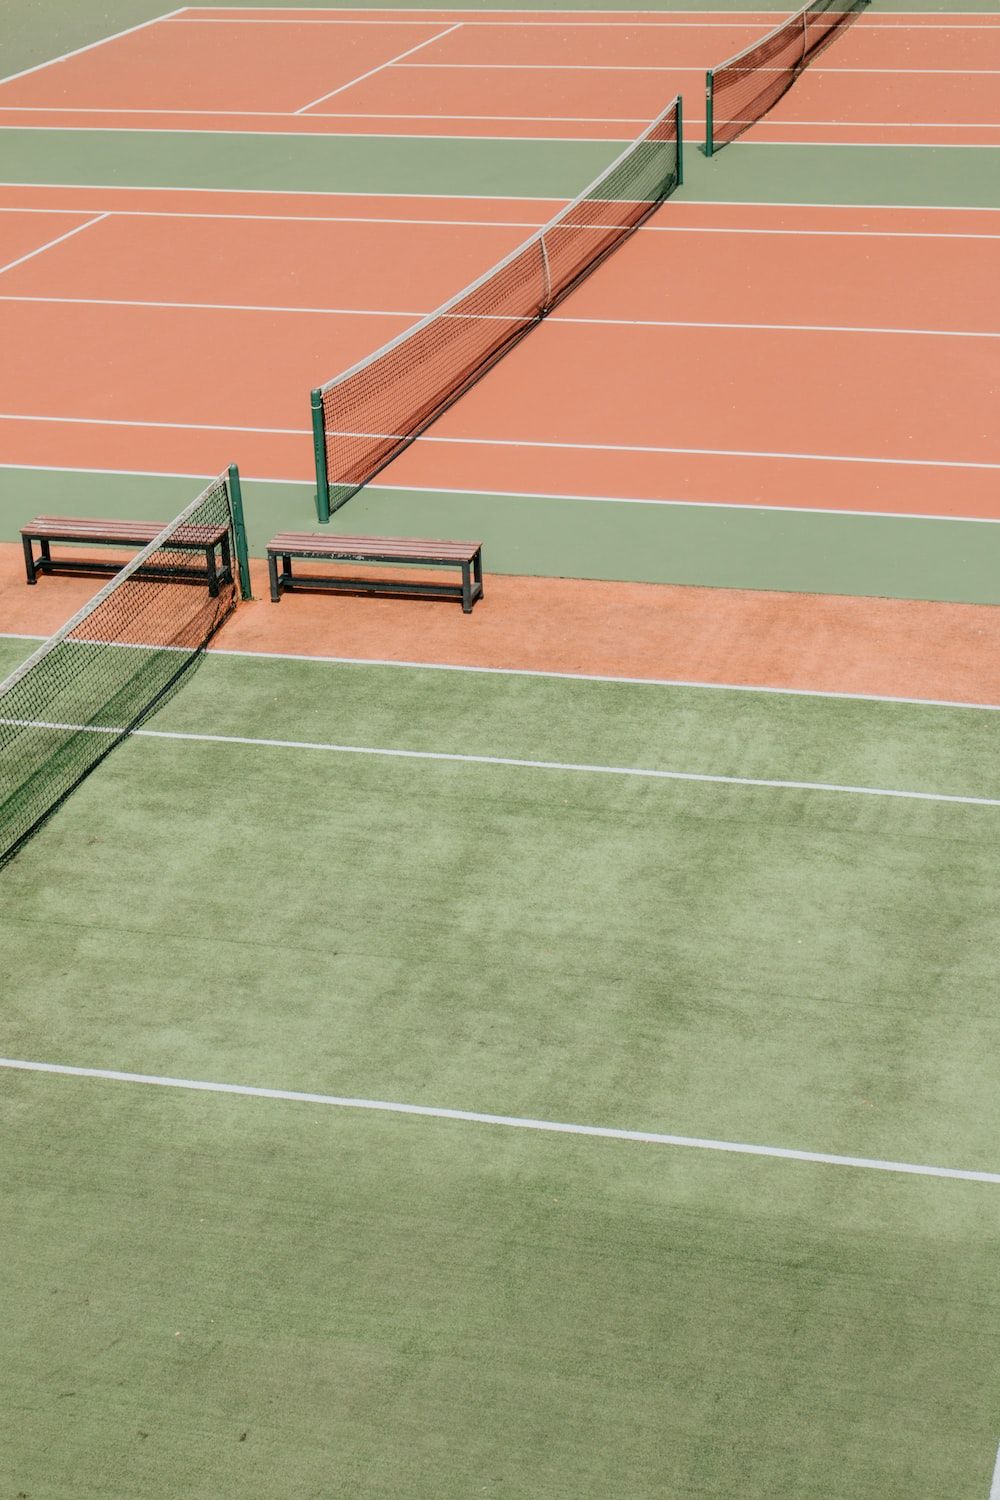 Aerial view of a tennis court with two benches - Tennis